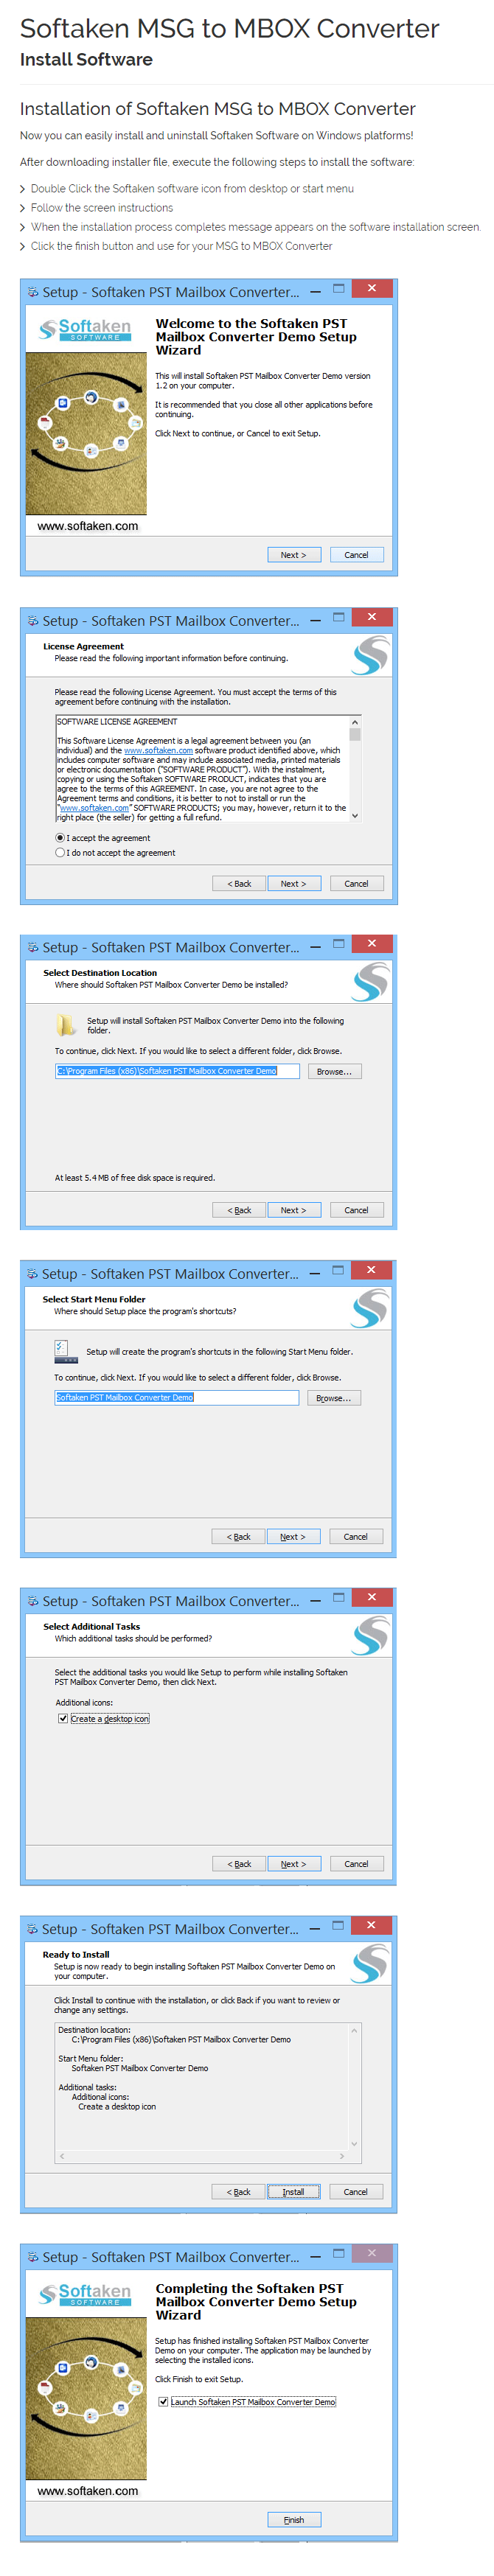 MSG to MBOX Converter Installation